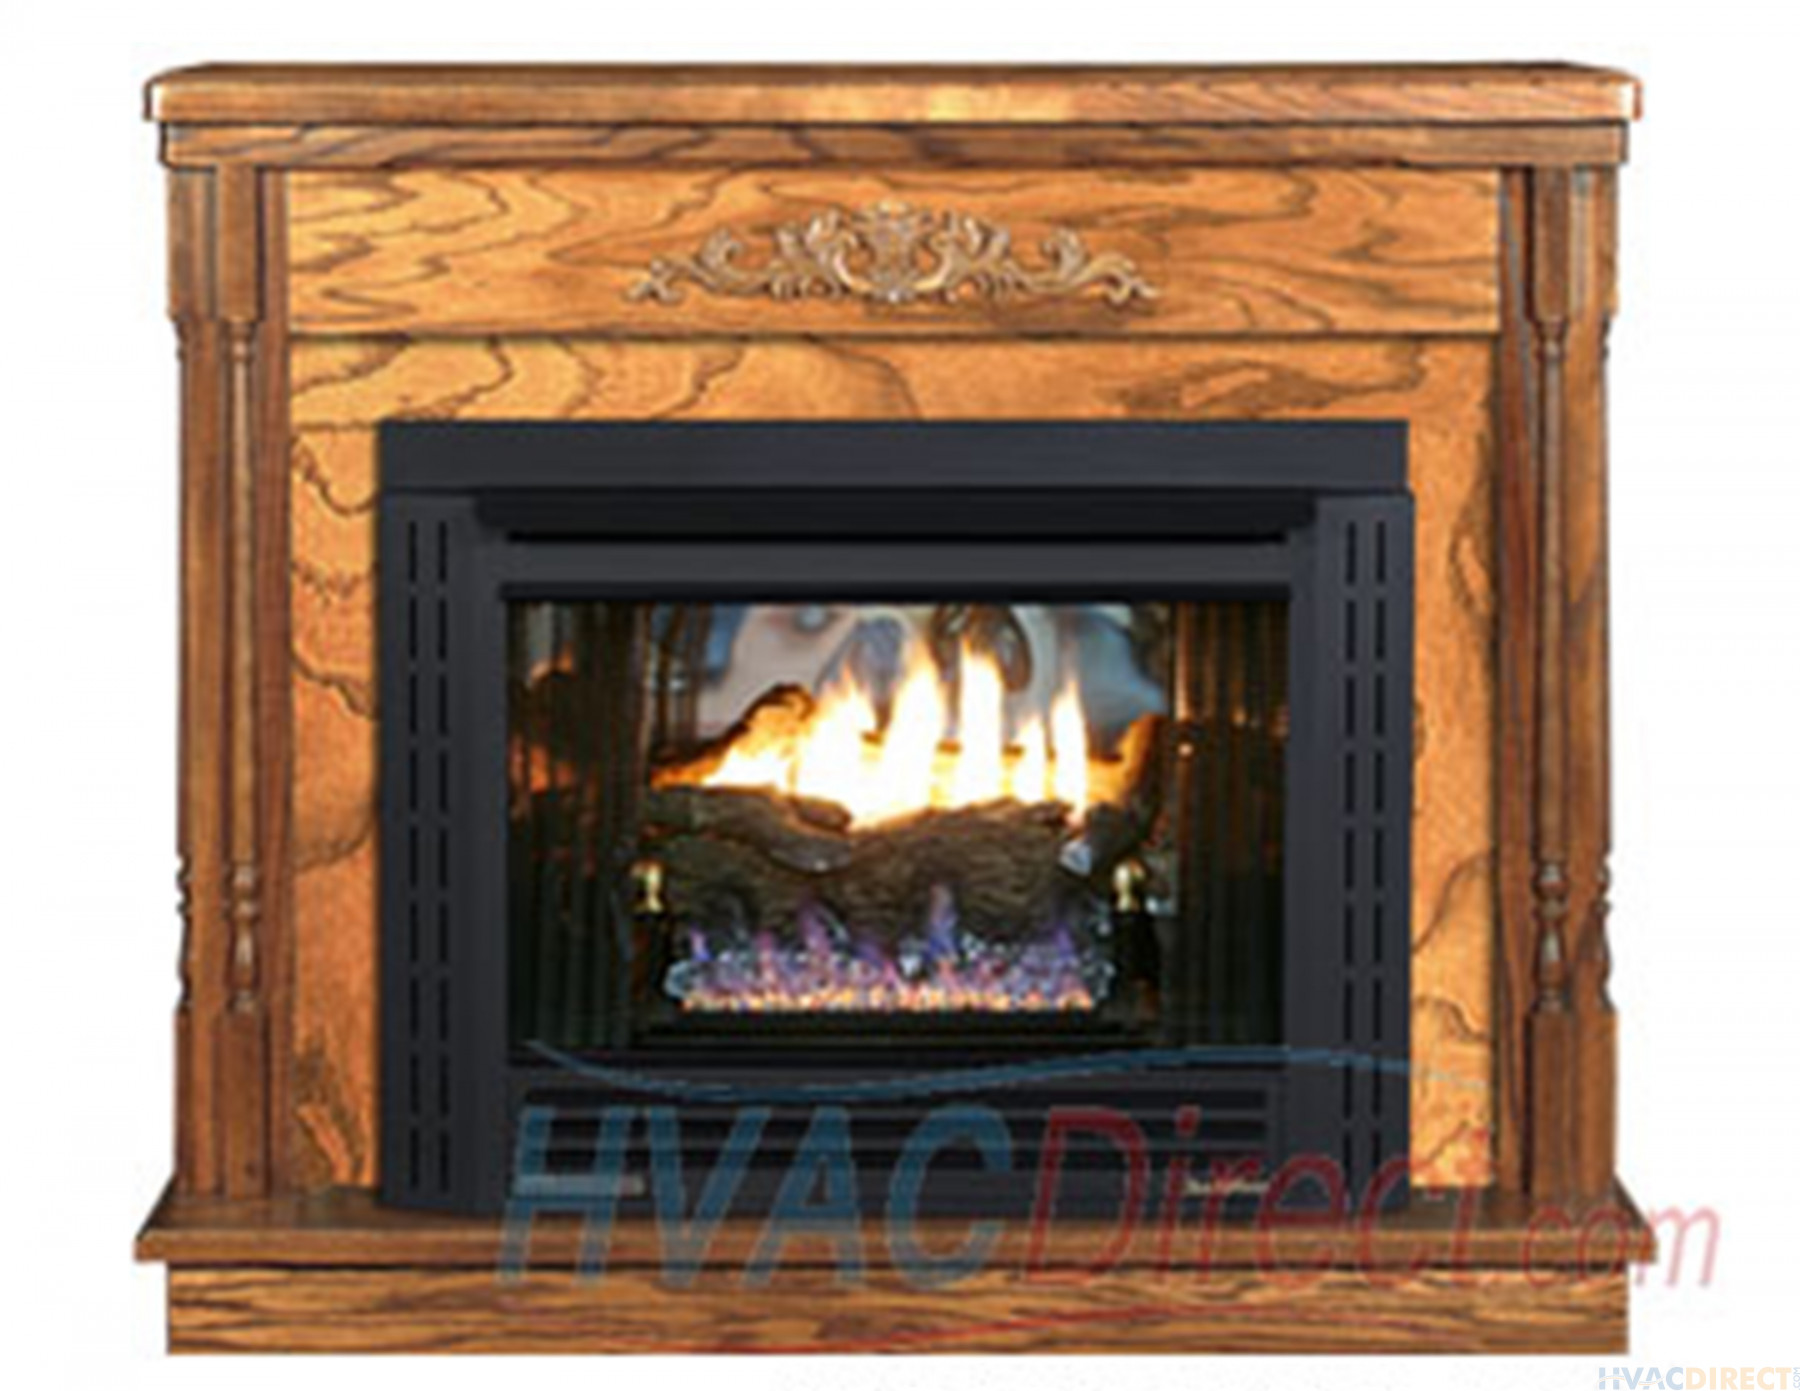 Ultra Thin Gas Fireplaces Awesome Buck Stove Model 34zc Zero Clearance Vent Free Gas Fireplace